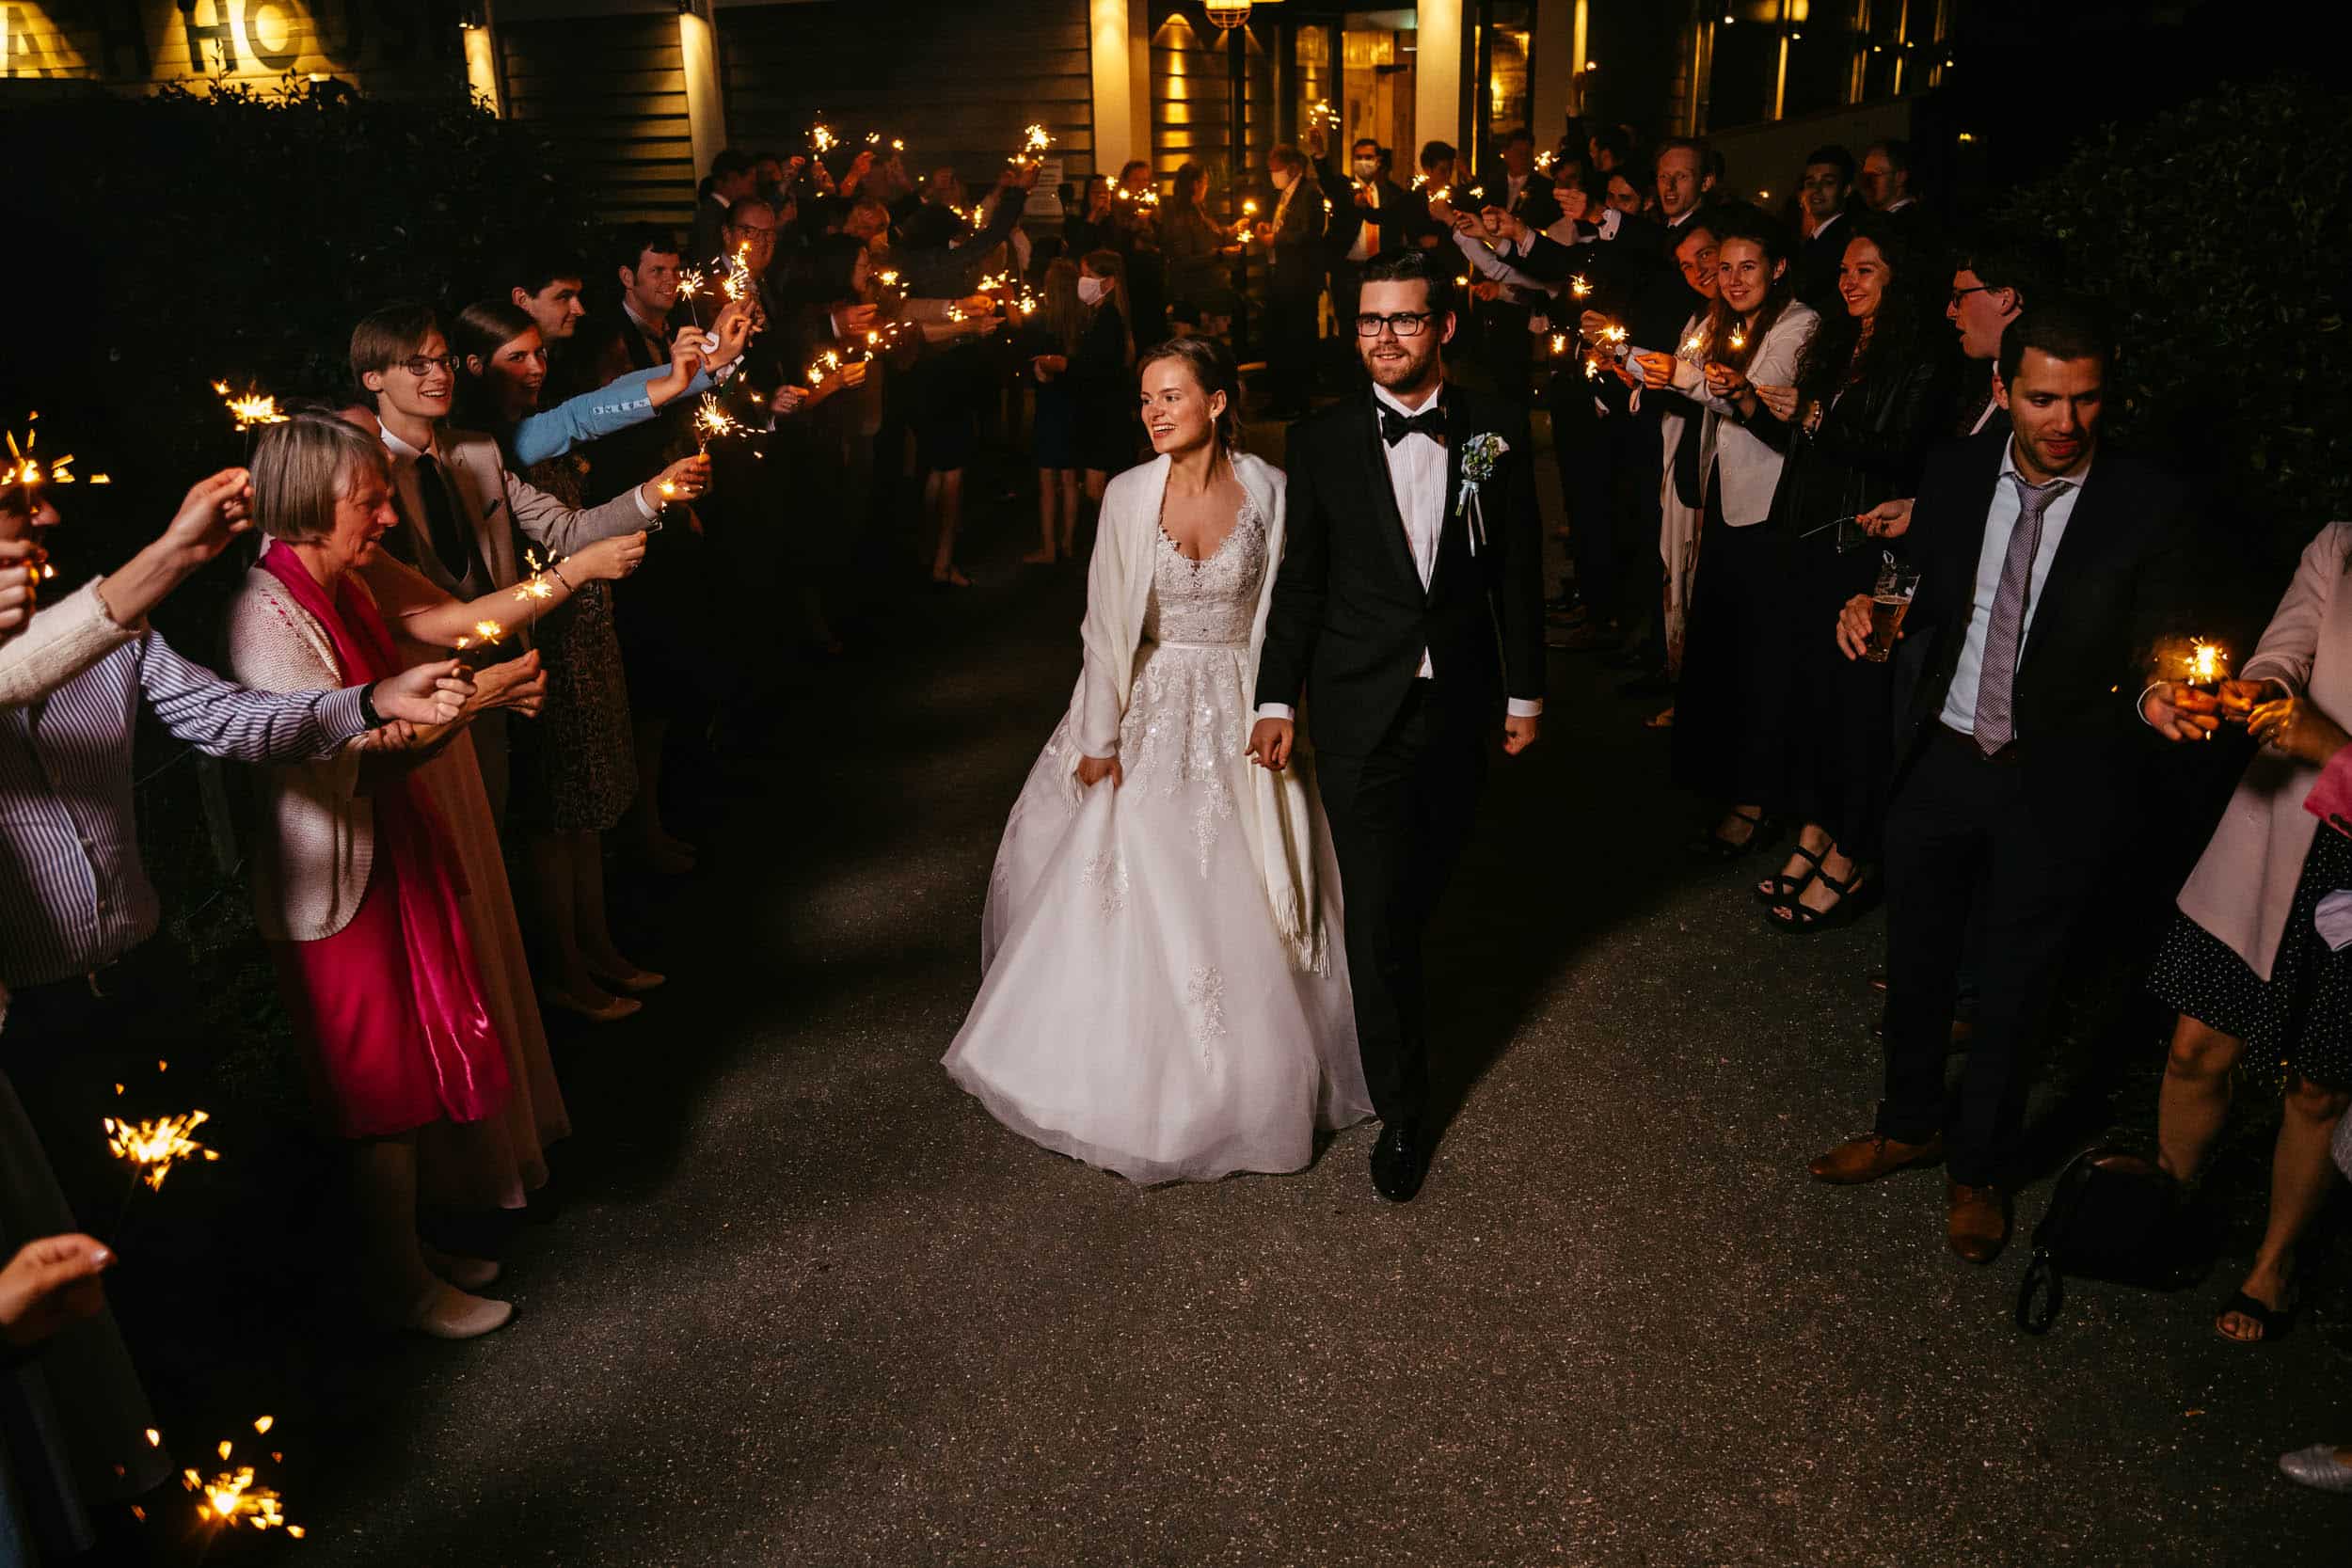 A bride and groom, surrounded by the enchanting atmosphere of a Delft botanical garden, share a magical moment as they walk hand in hand, accompanied by the mesmer